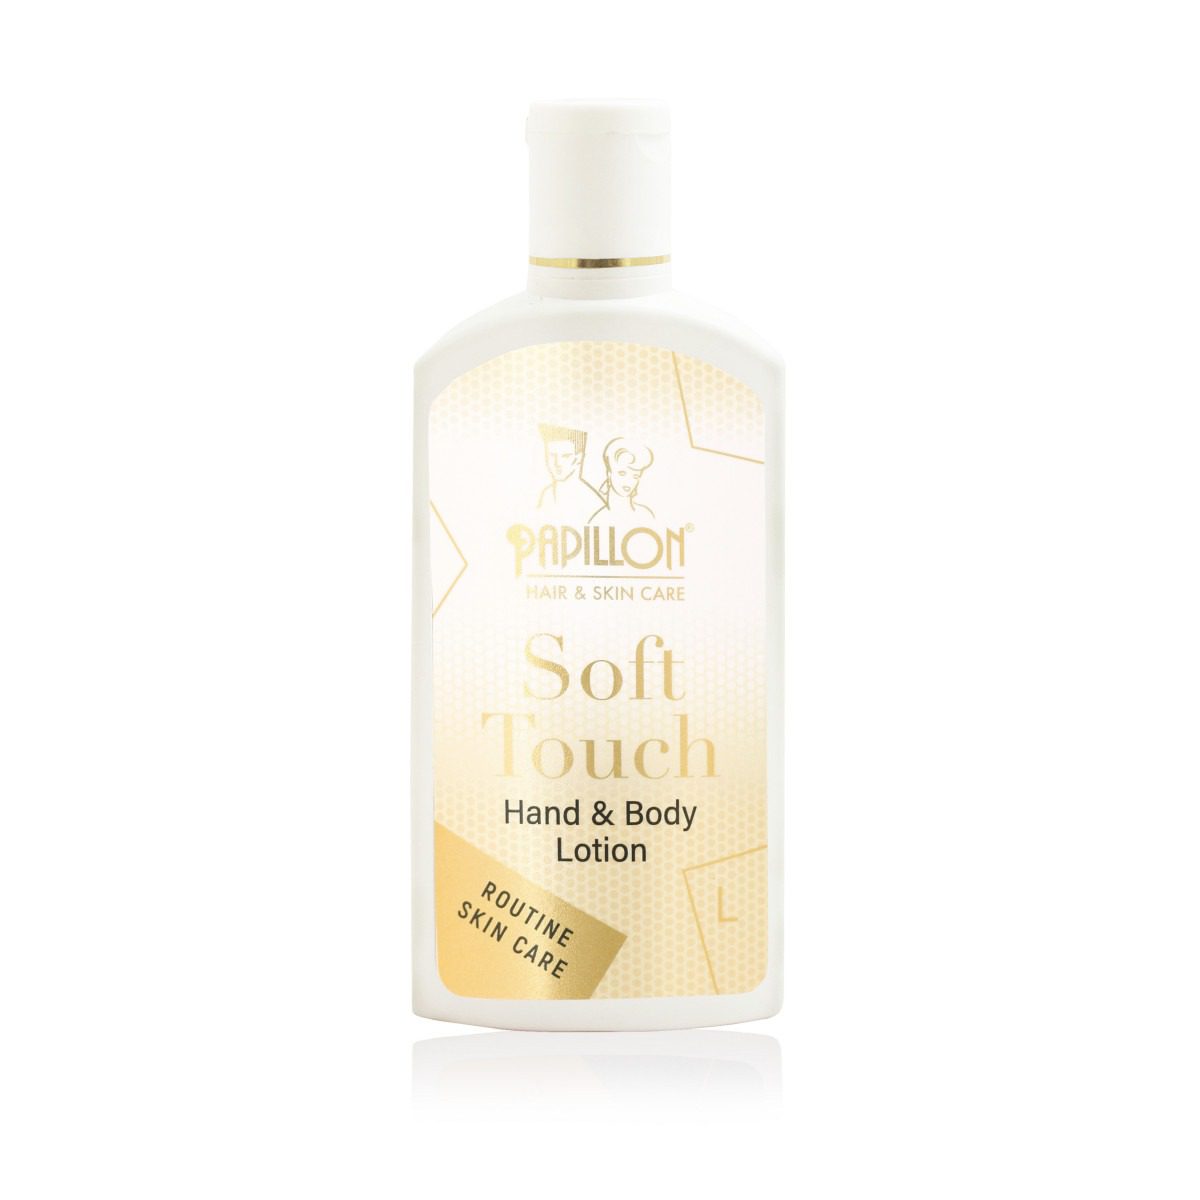 soft touch Hand & Body Lotion